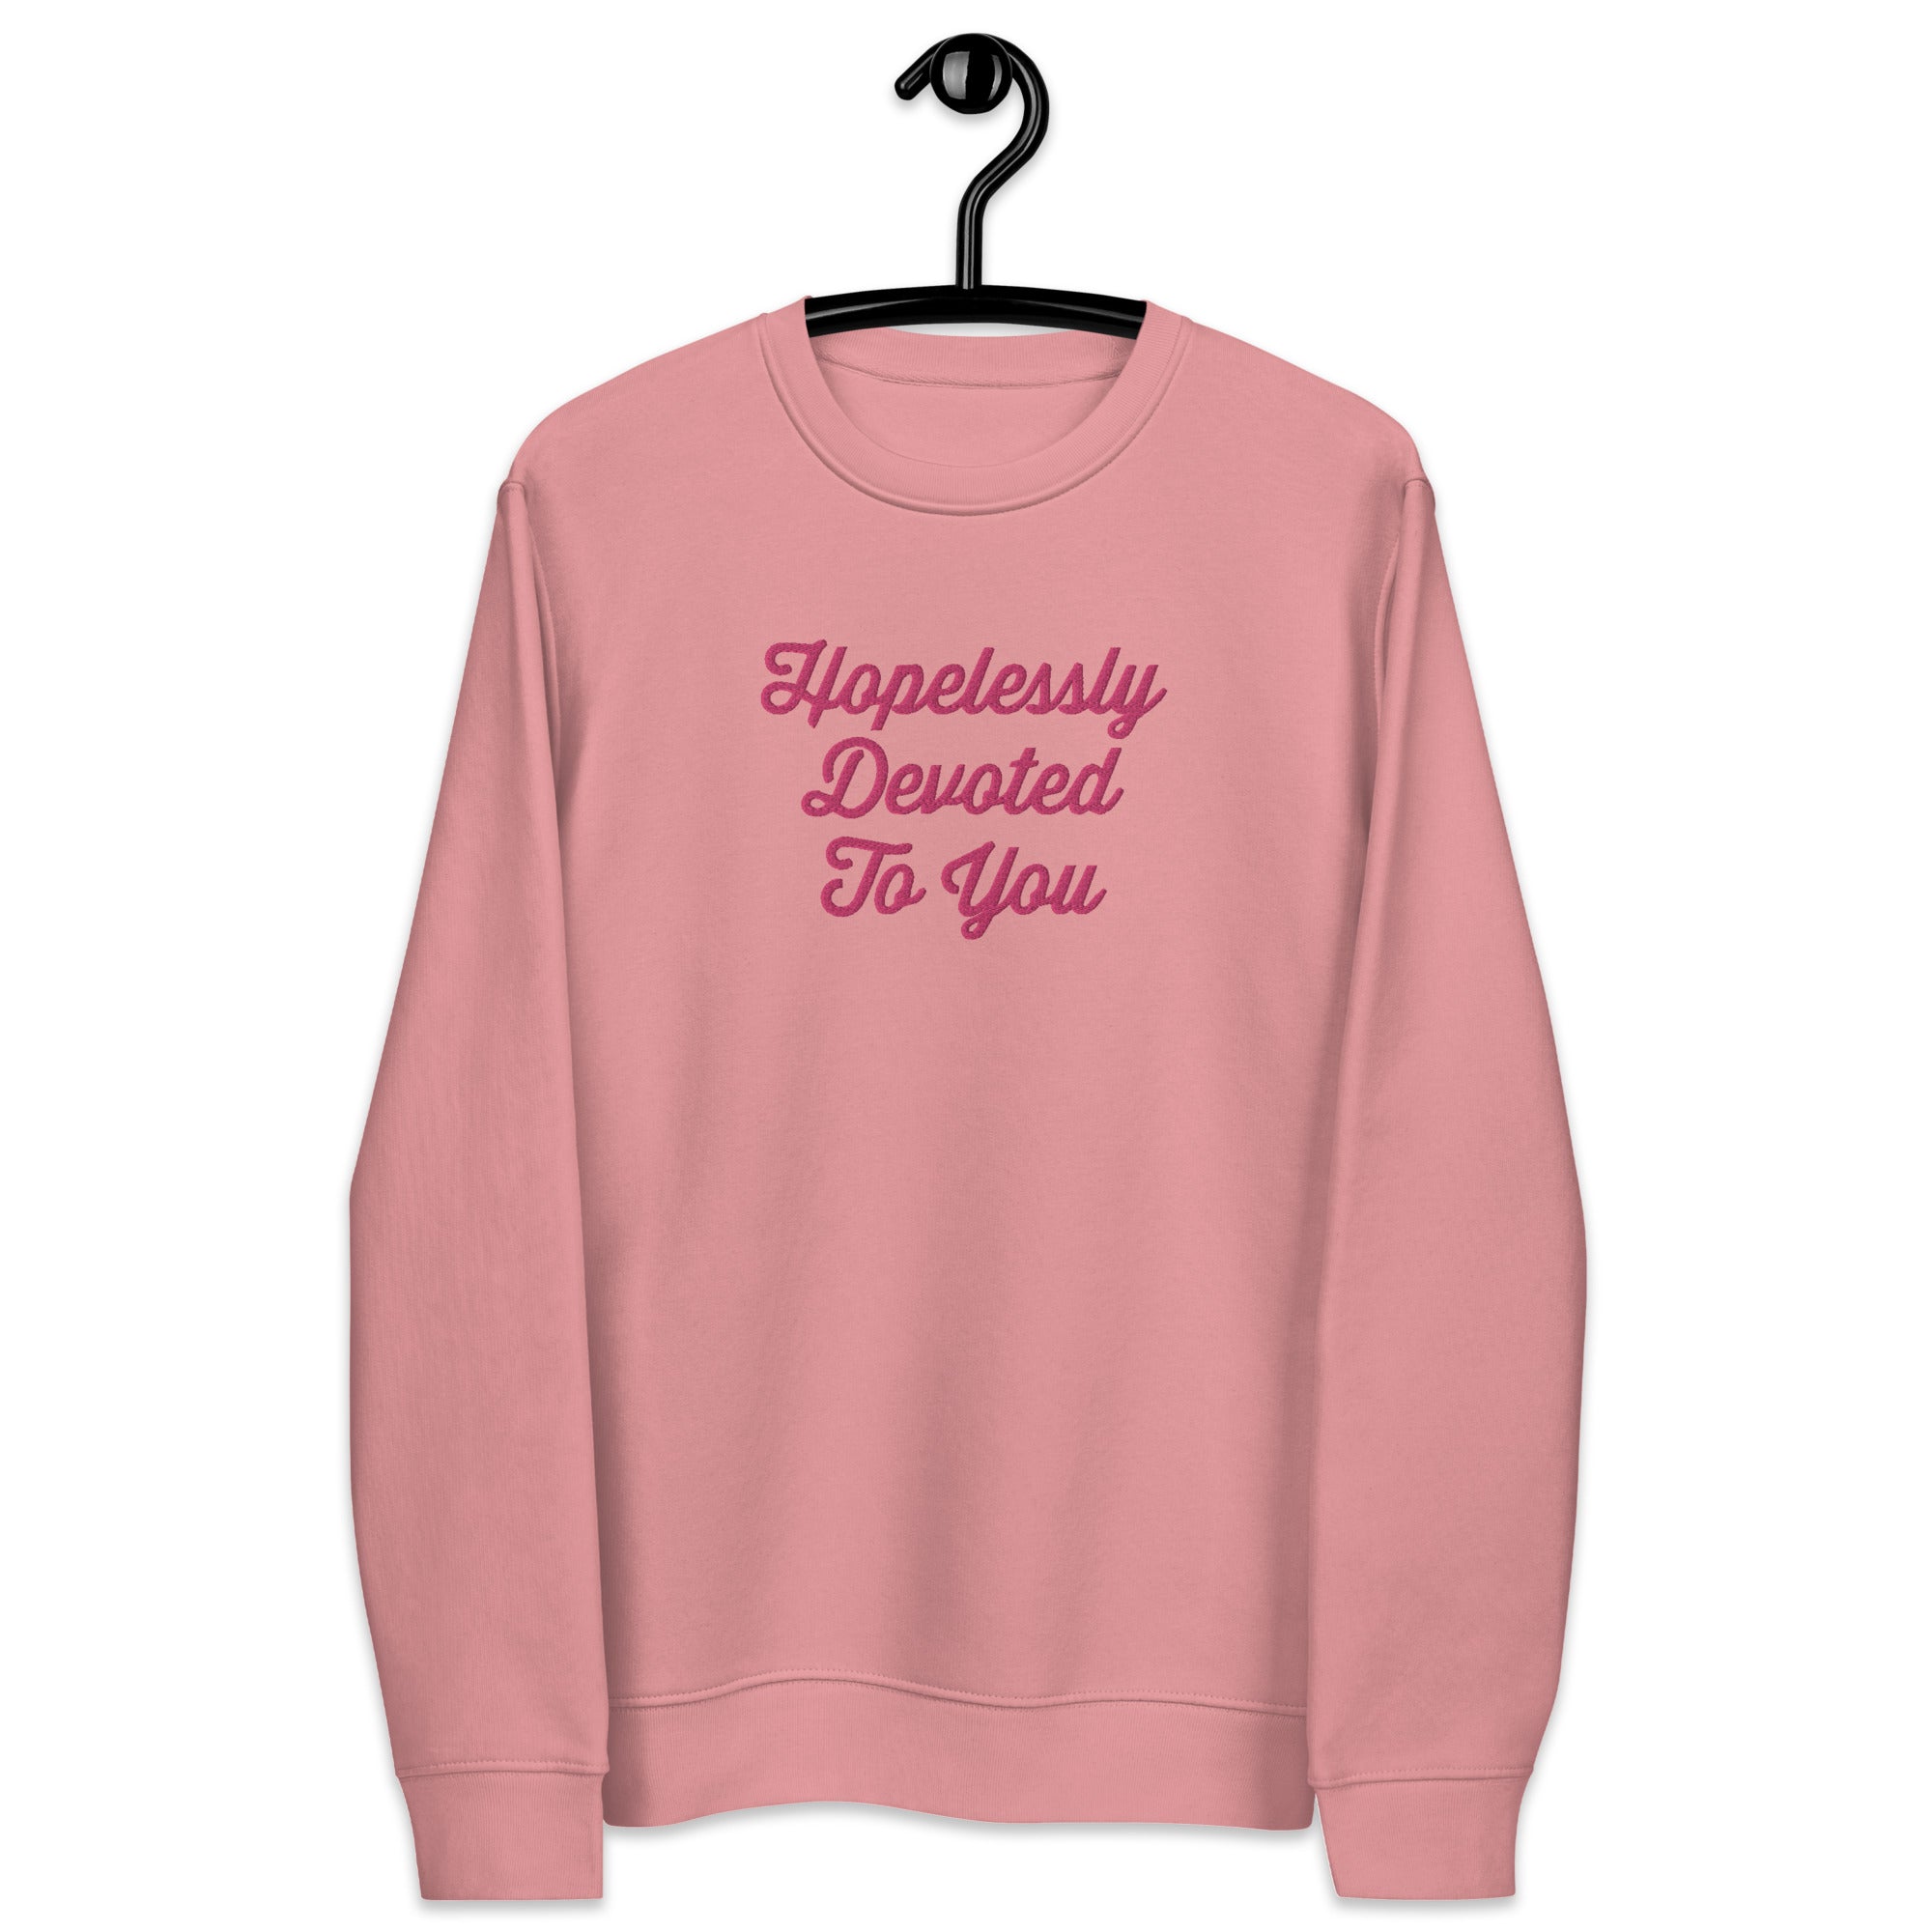 HOPELESSLY DEVOTED TO YOU Embroidered Unisex Organic Sweatshirt - Pink Text